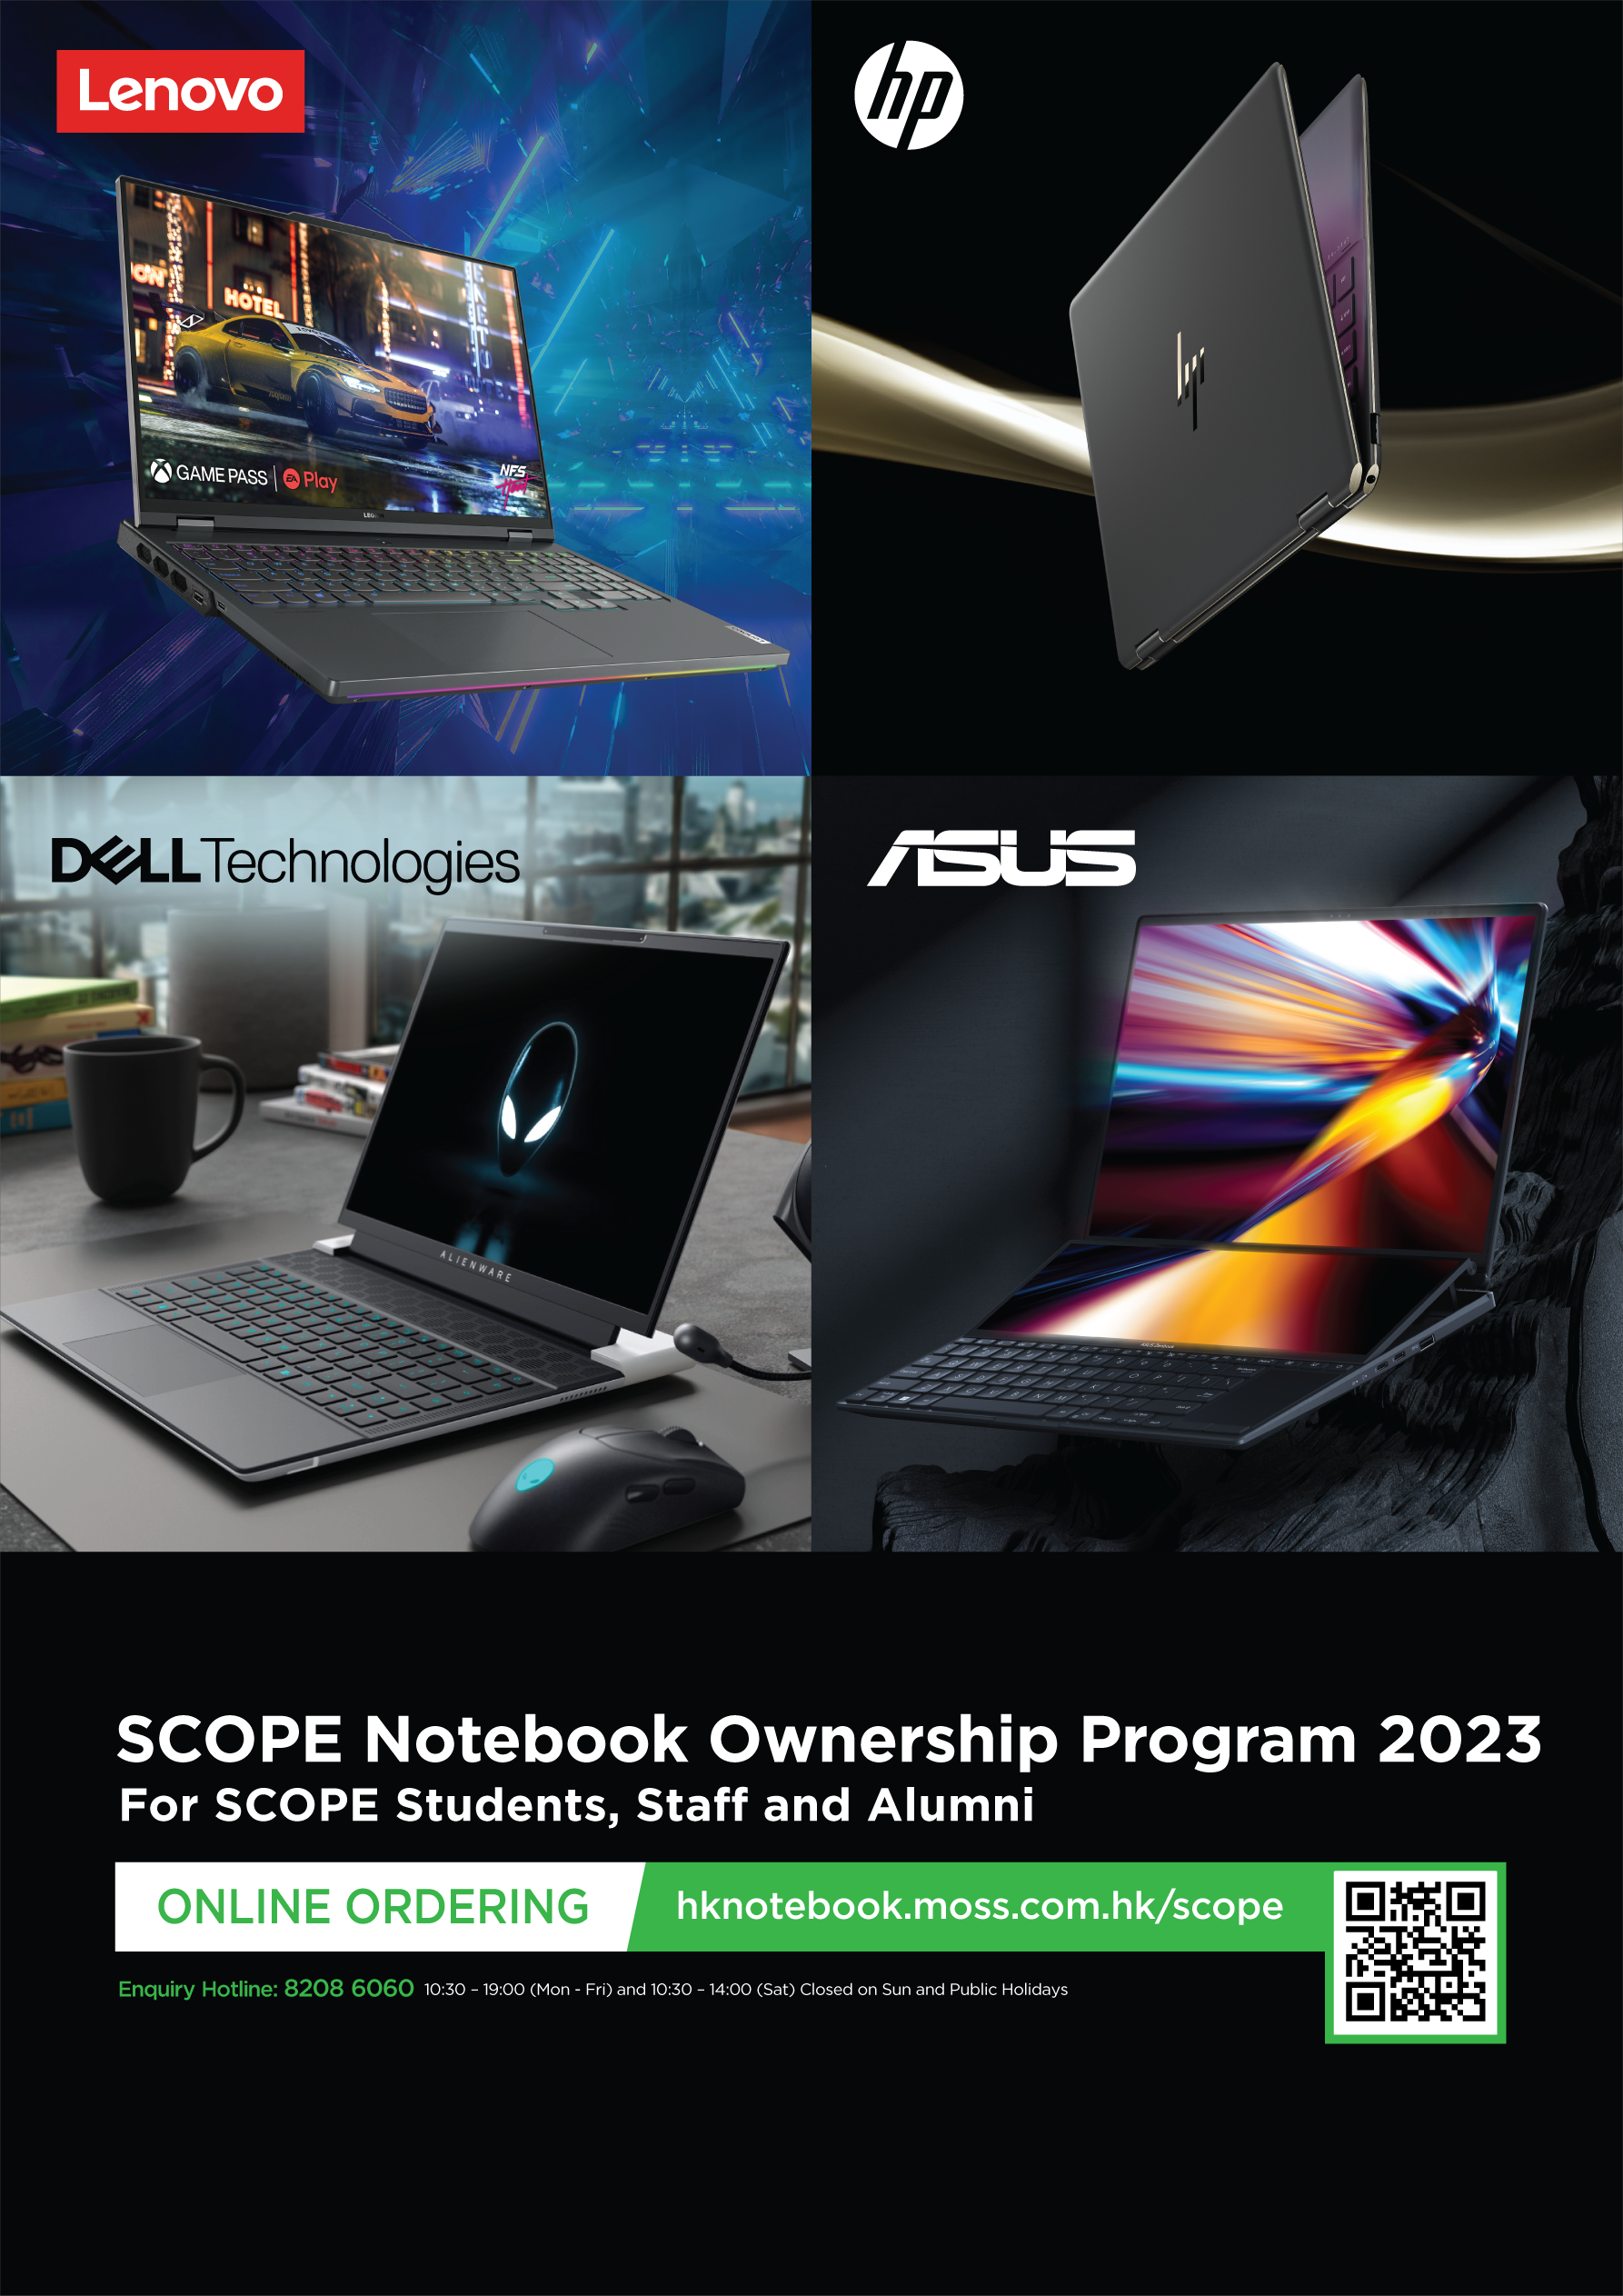 Notebook Ownership Programme 2023